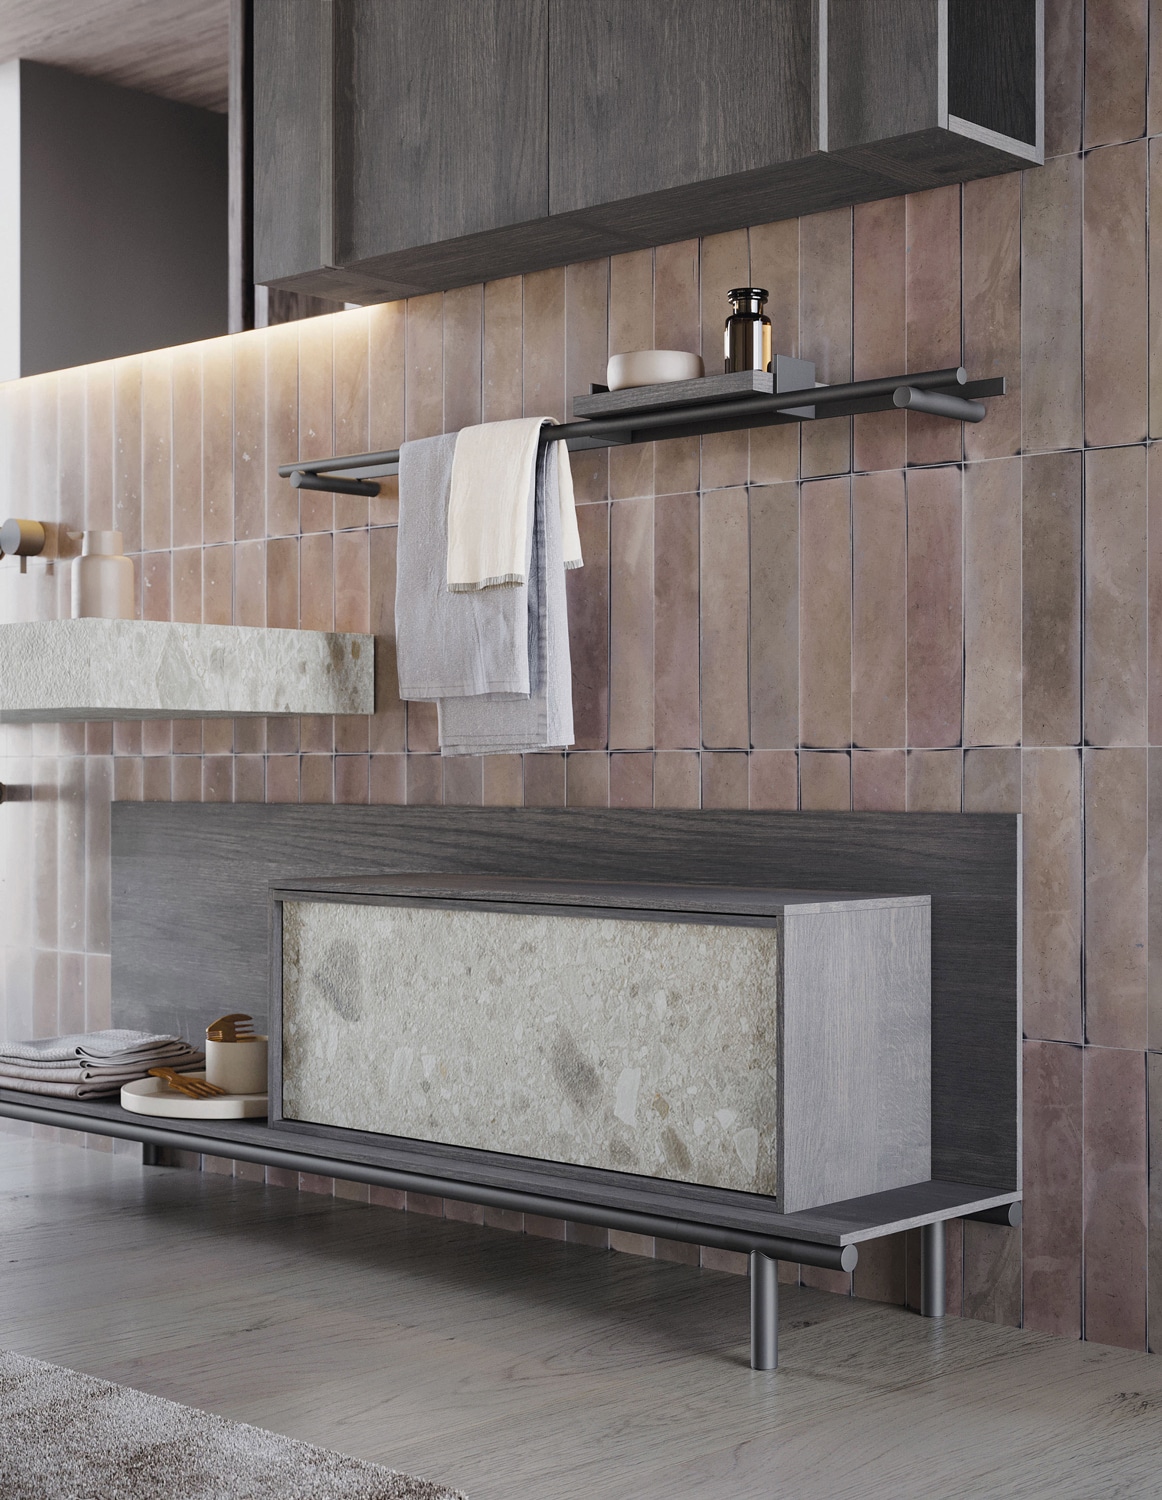 Sartus offers a variety of design solutions to create personalized bathroom environments. 